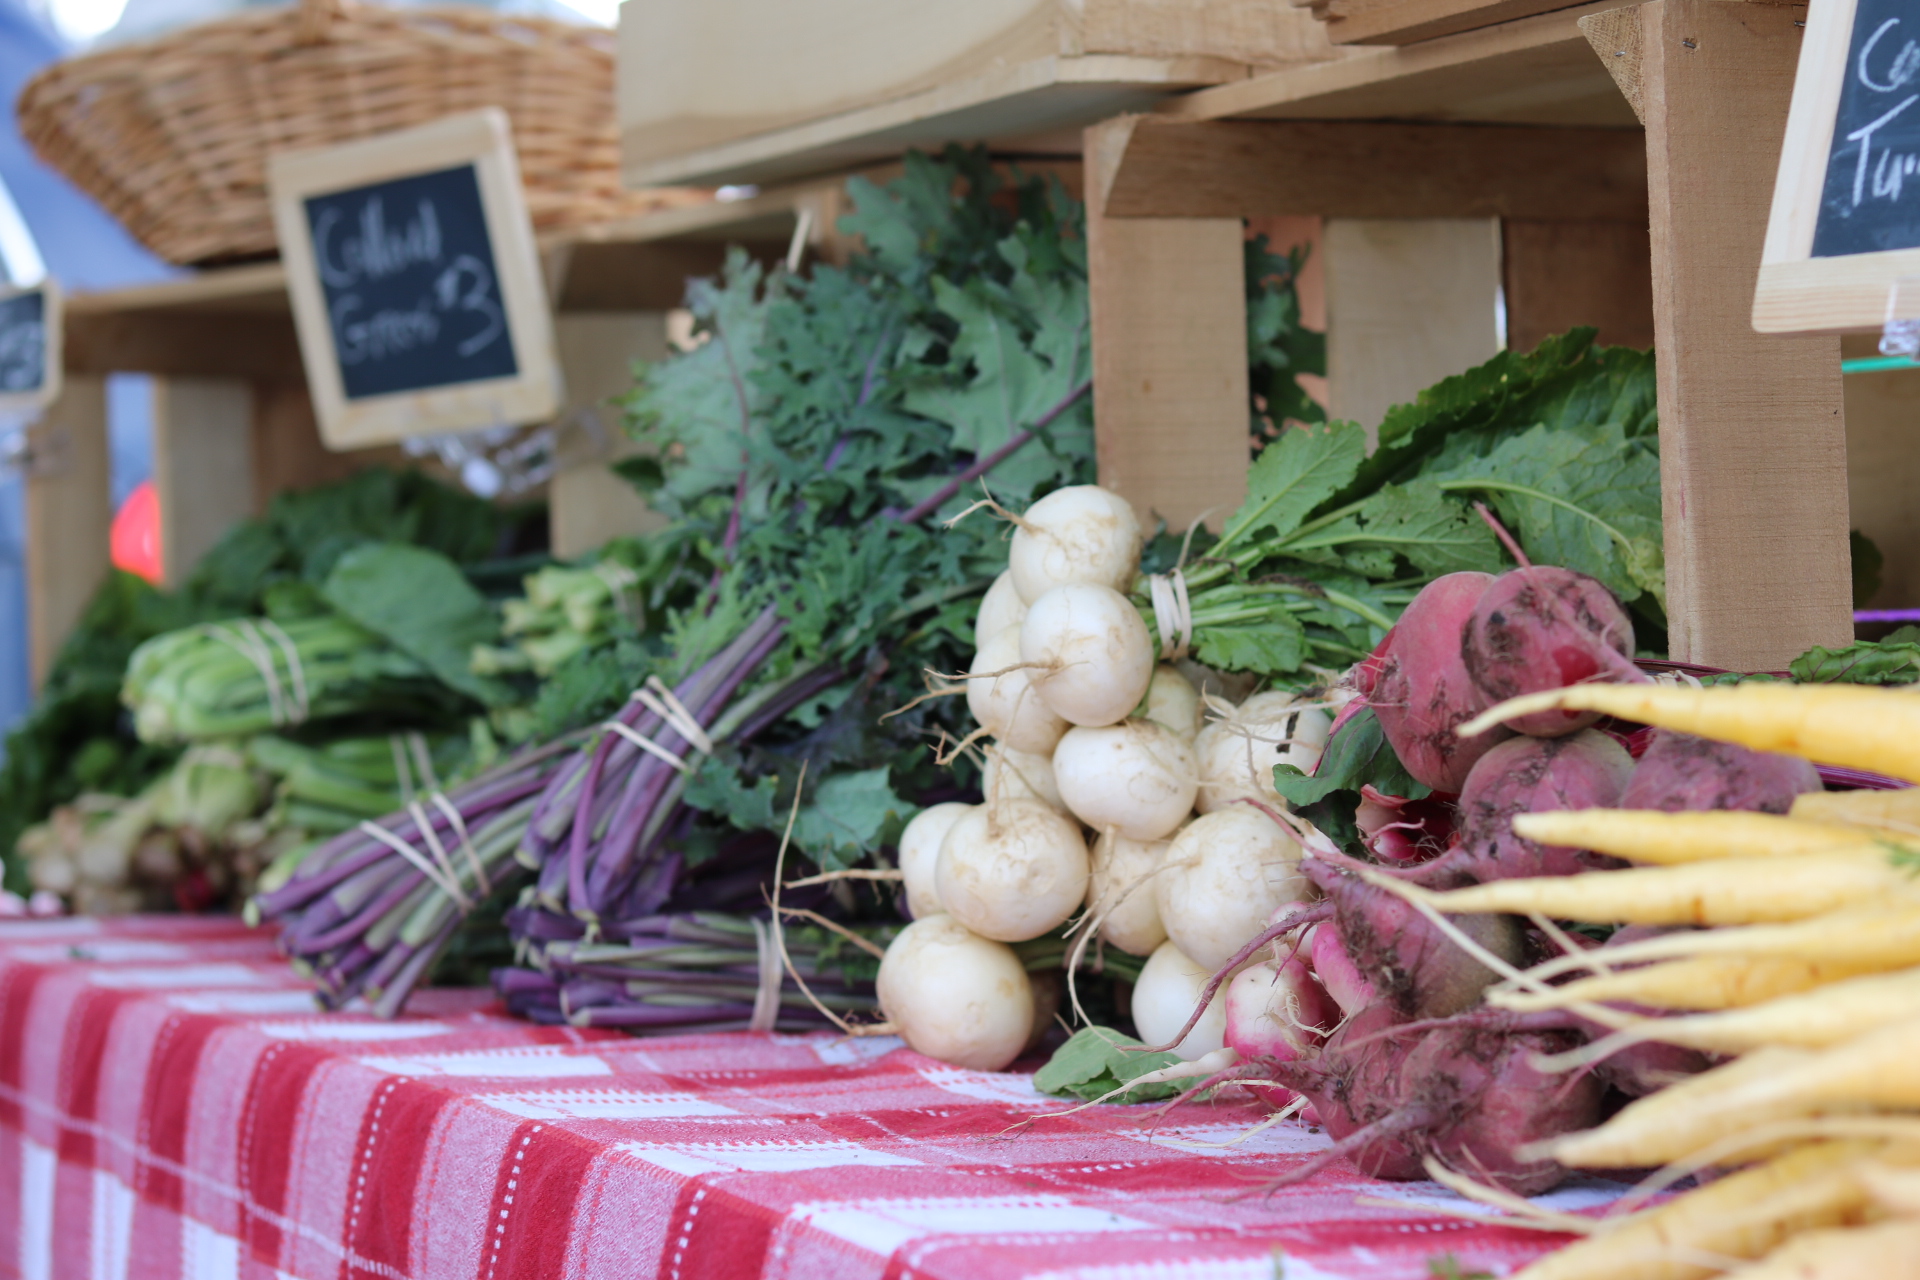 Save the Date May 13 for Upper Merion Farmers Market Regular Season Opening Day